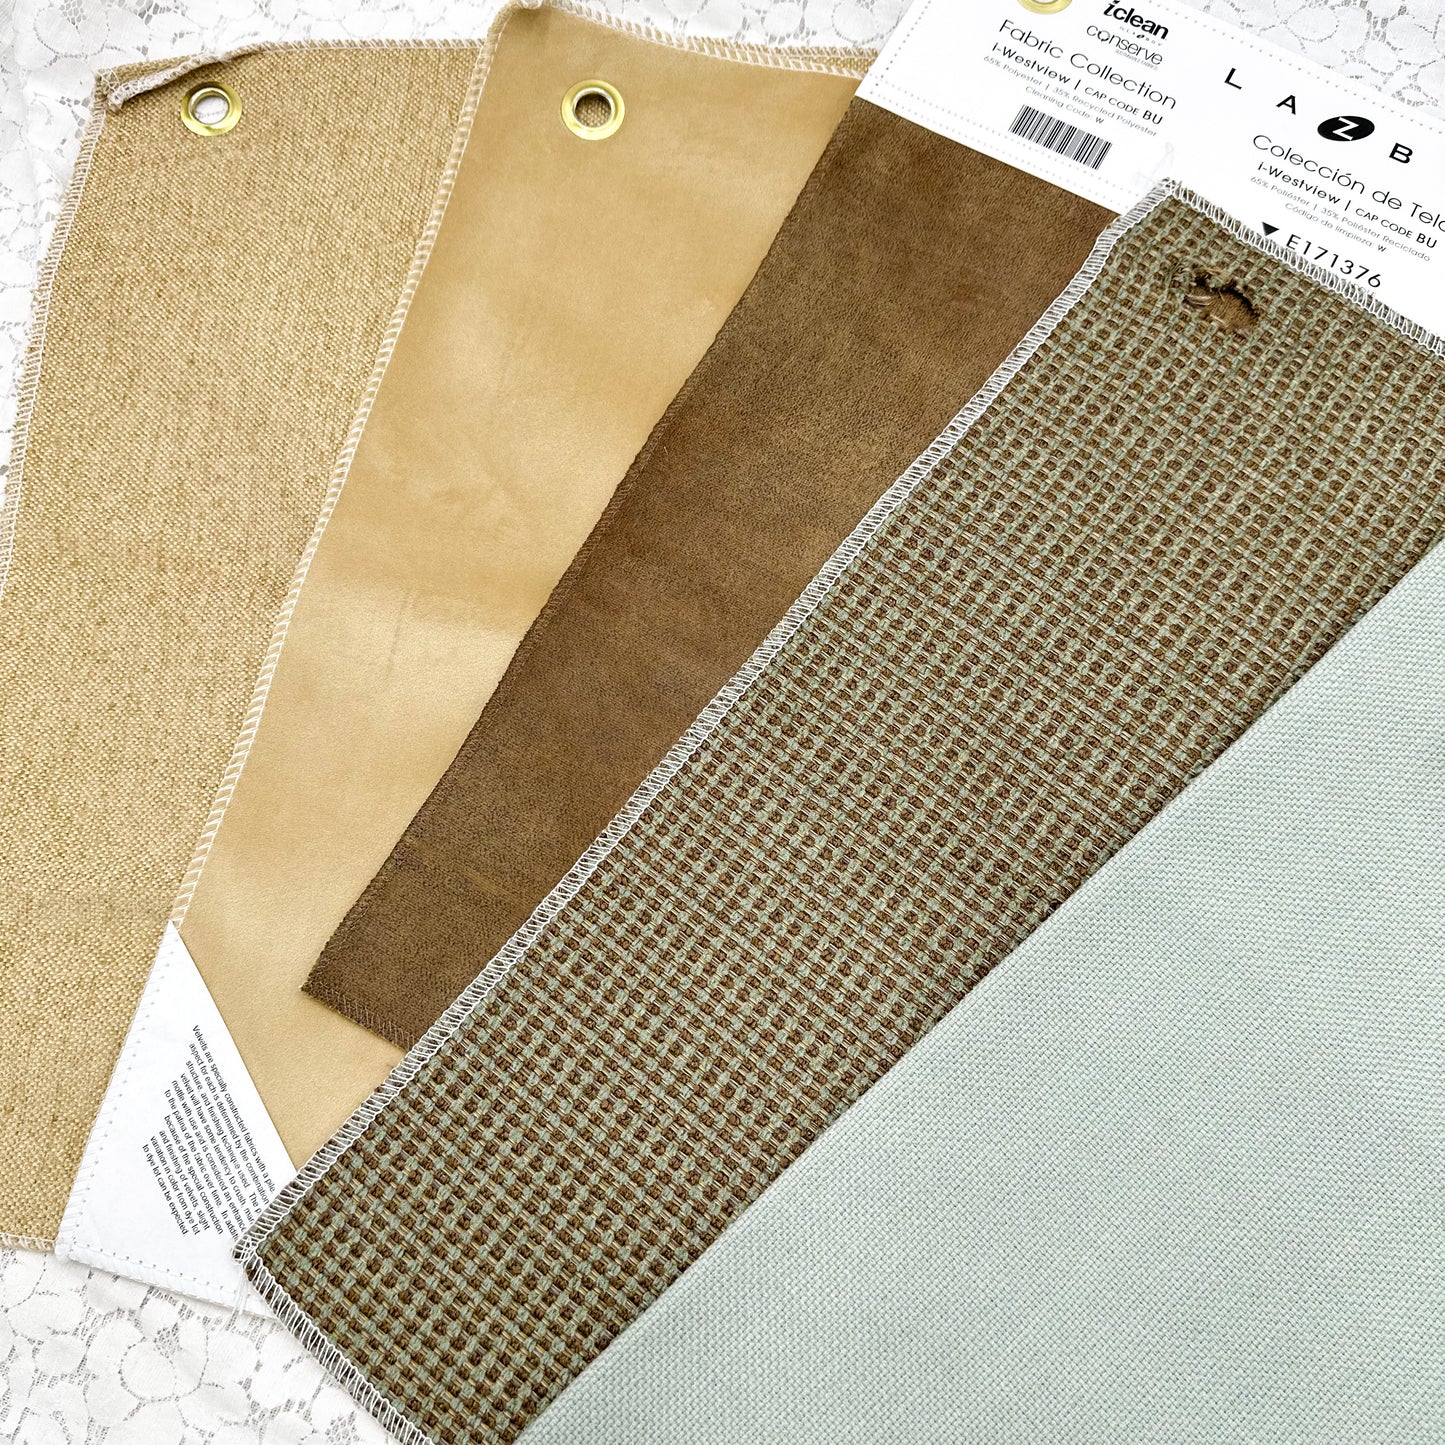 Upholstery Fabric Samples with Hangers (set of 5)